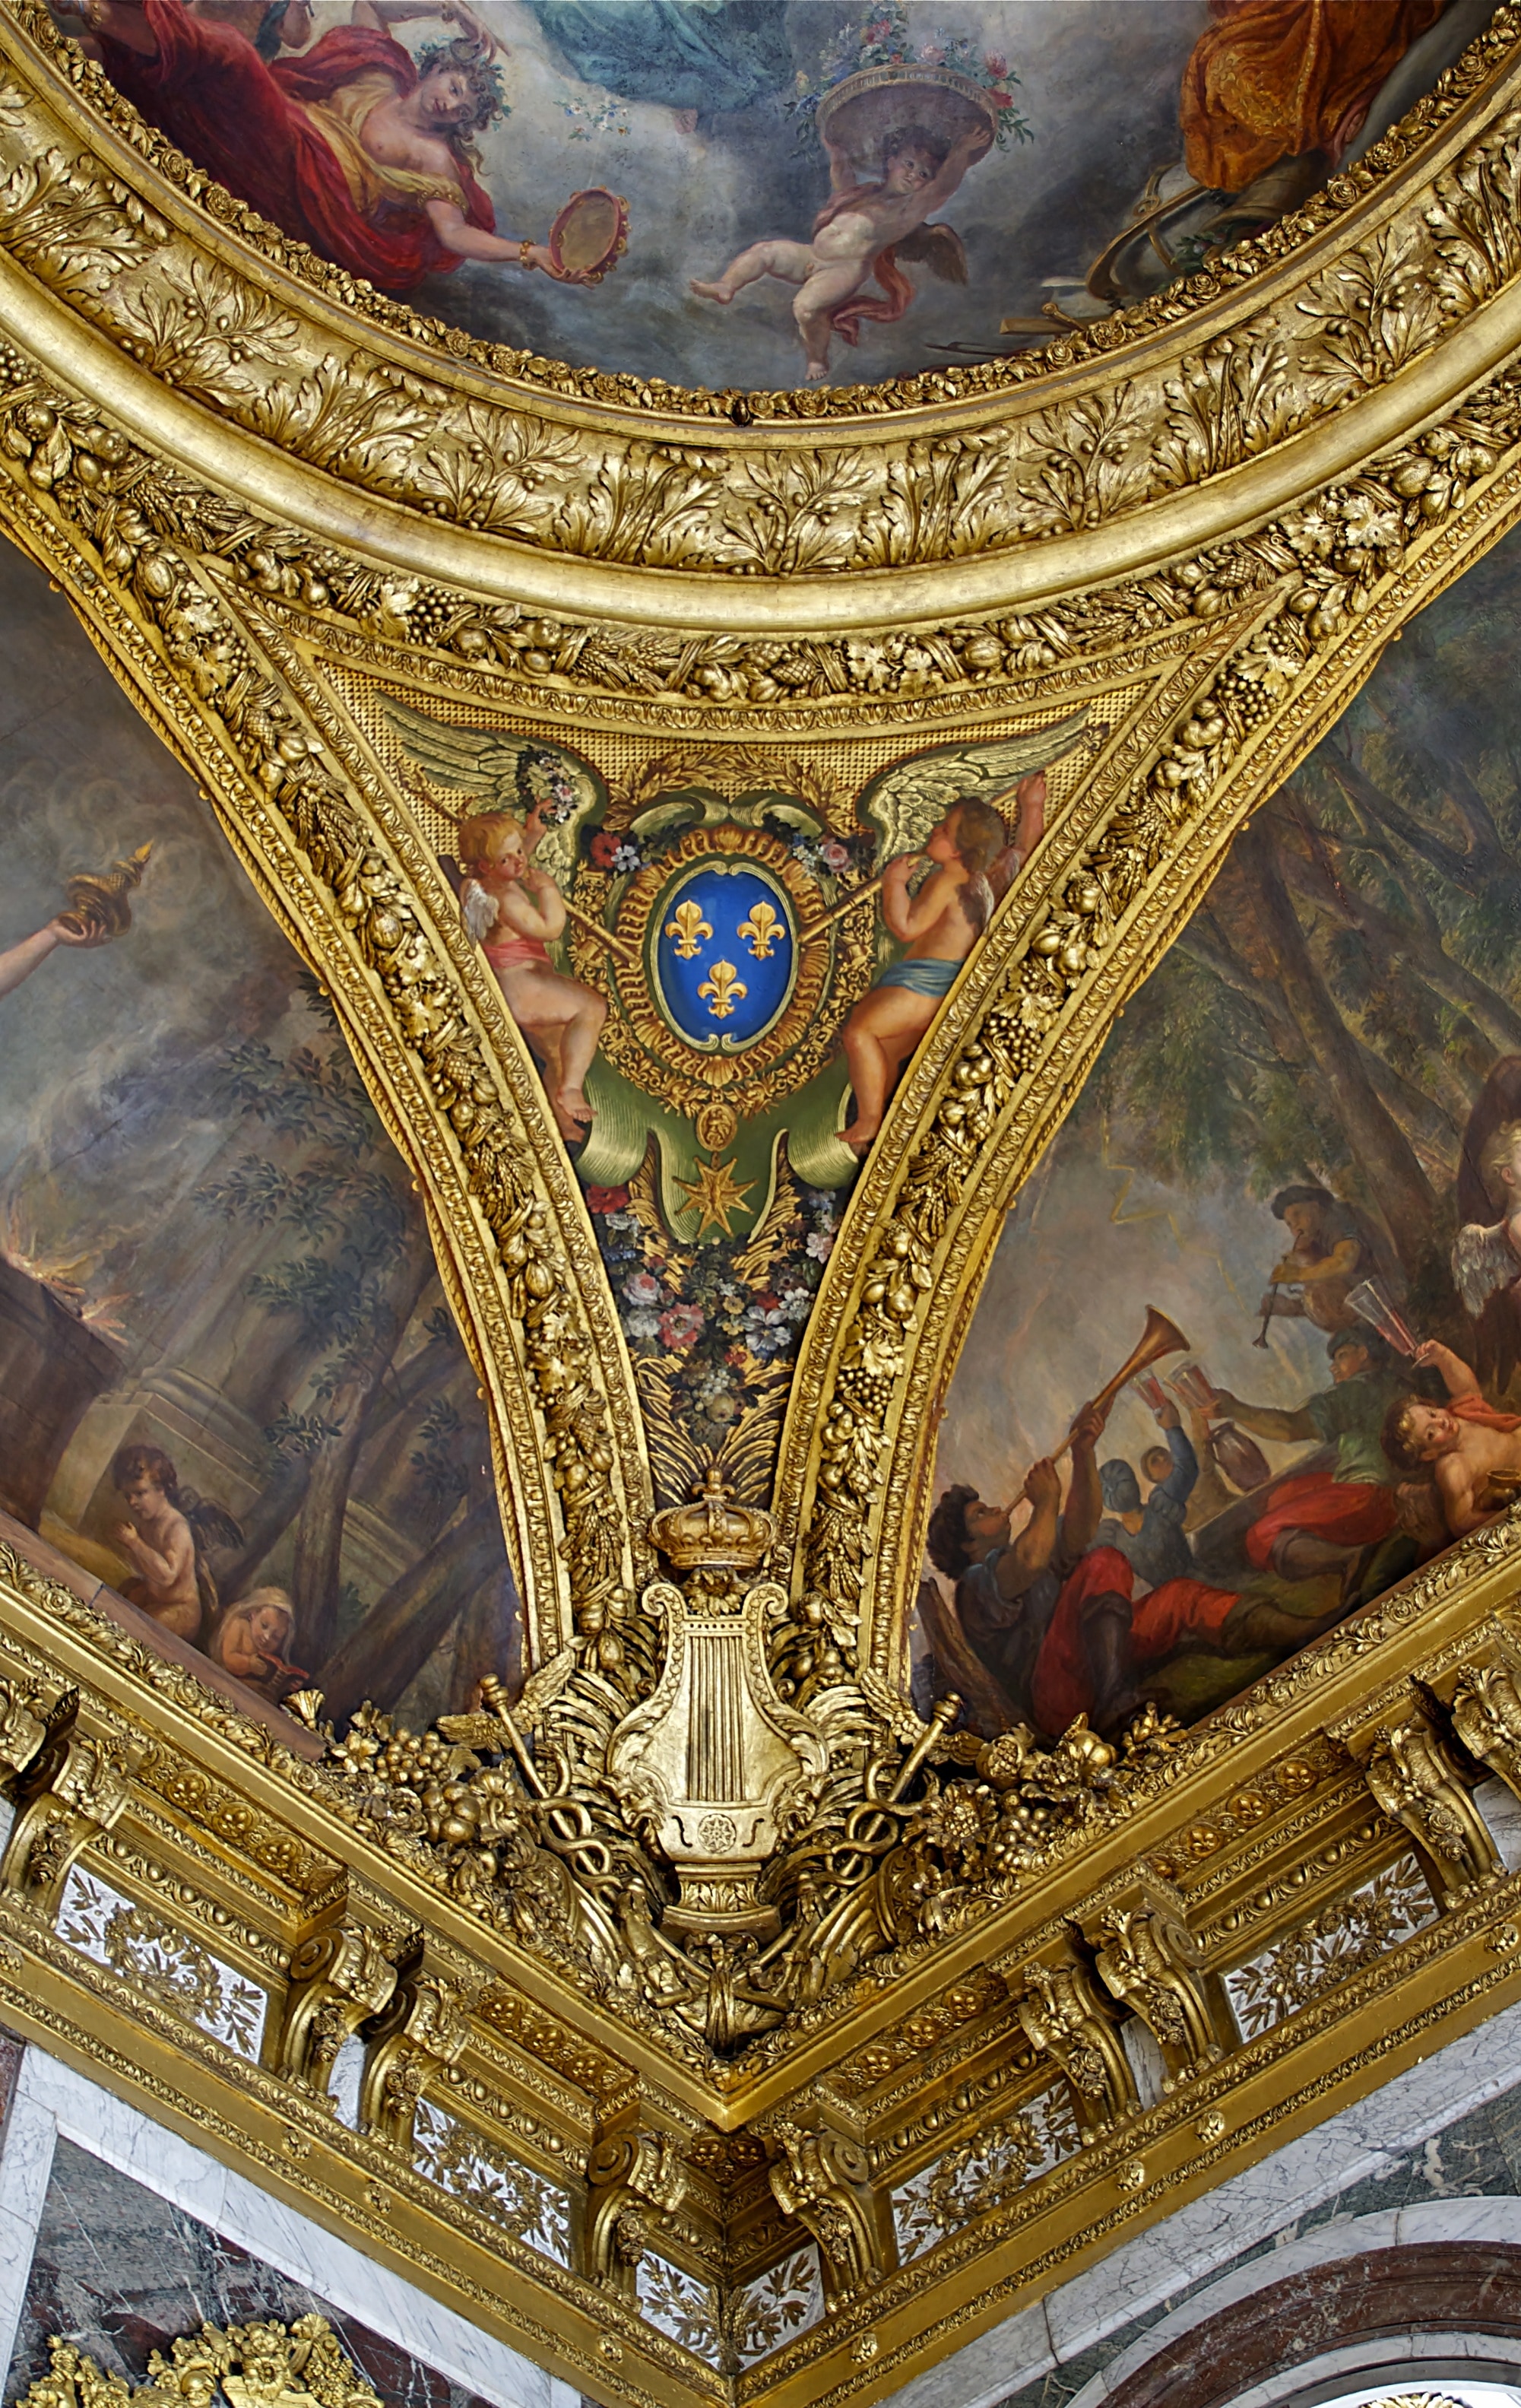 Castle, Room Of The Peace, Versailles, ornate, architecture